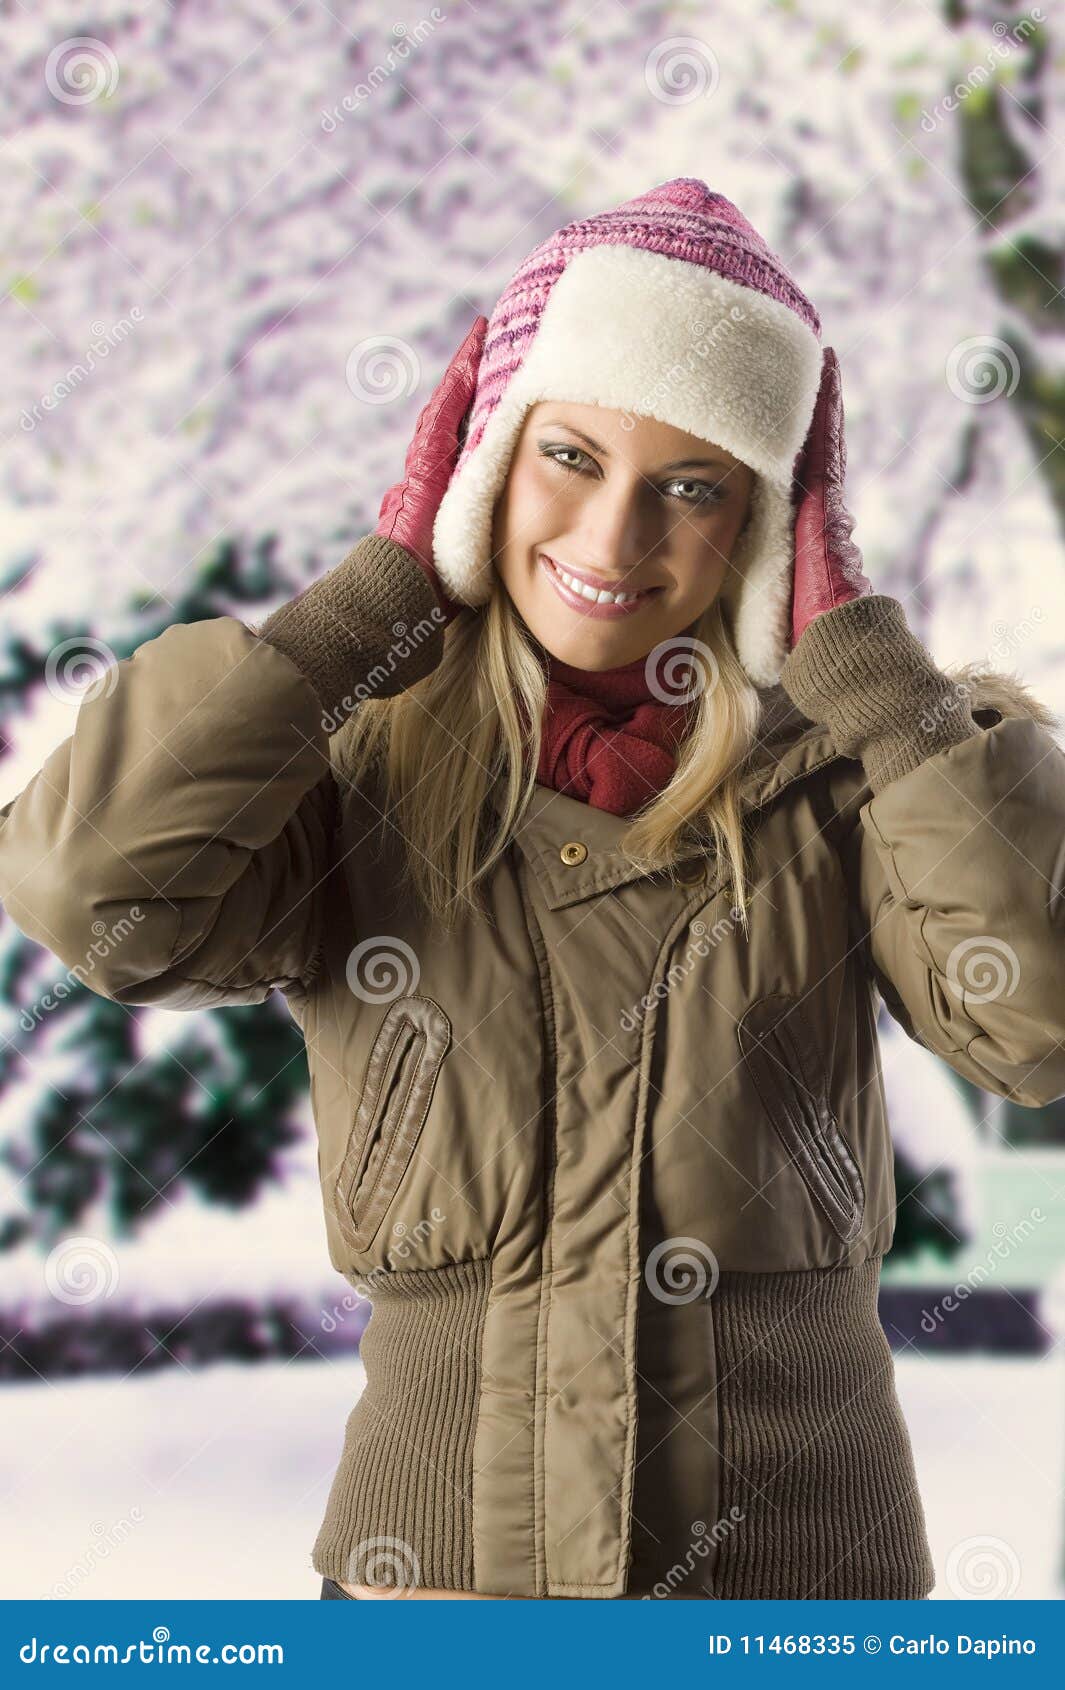 Girl with winter dress stock image. Image of fashion - 11468335